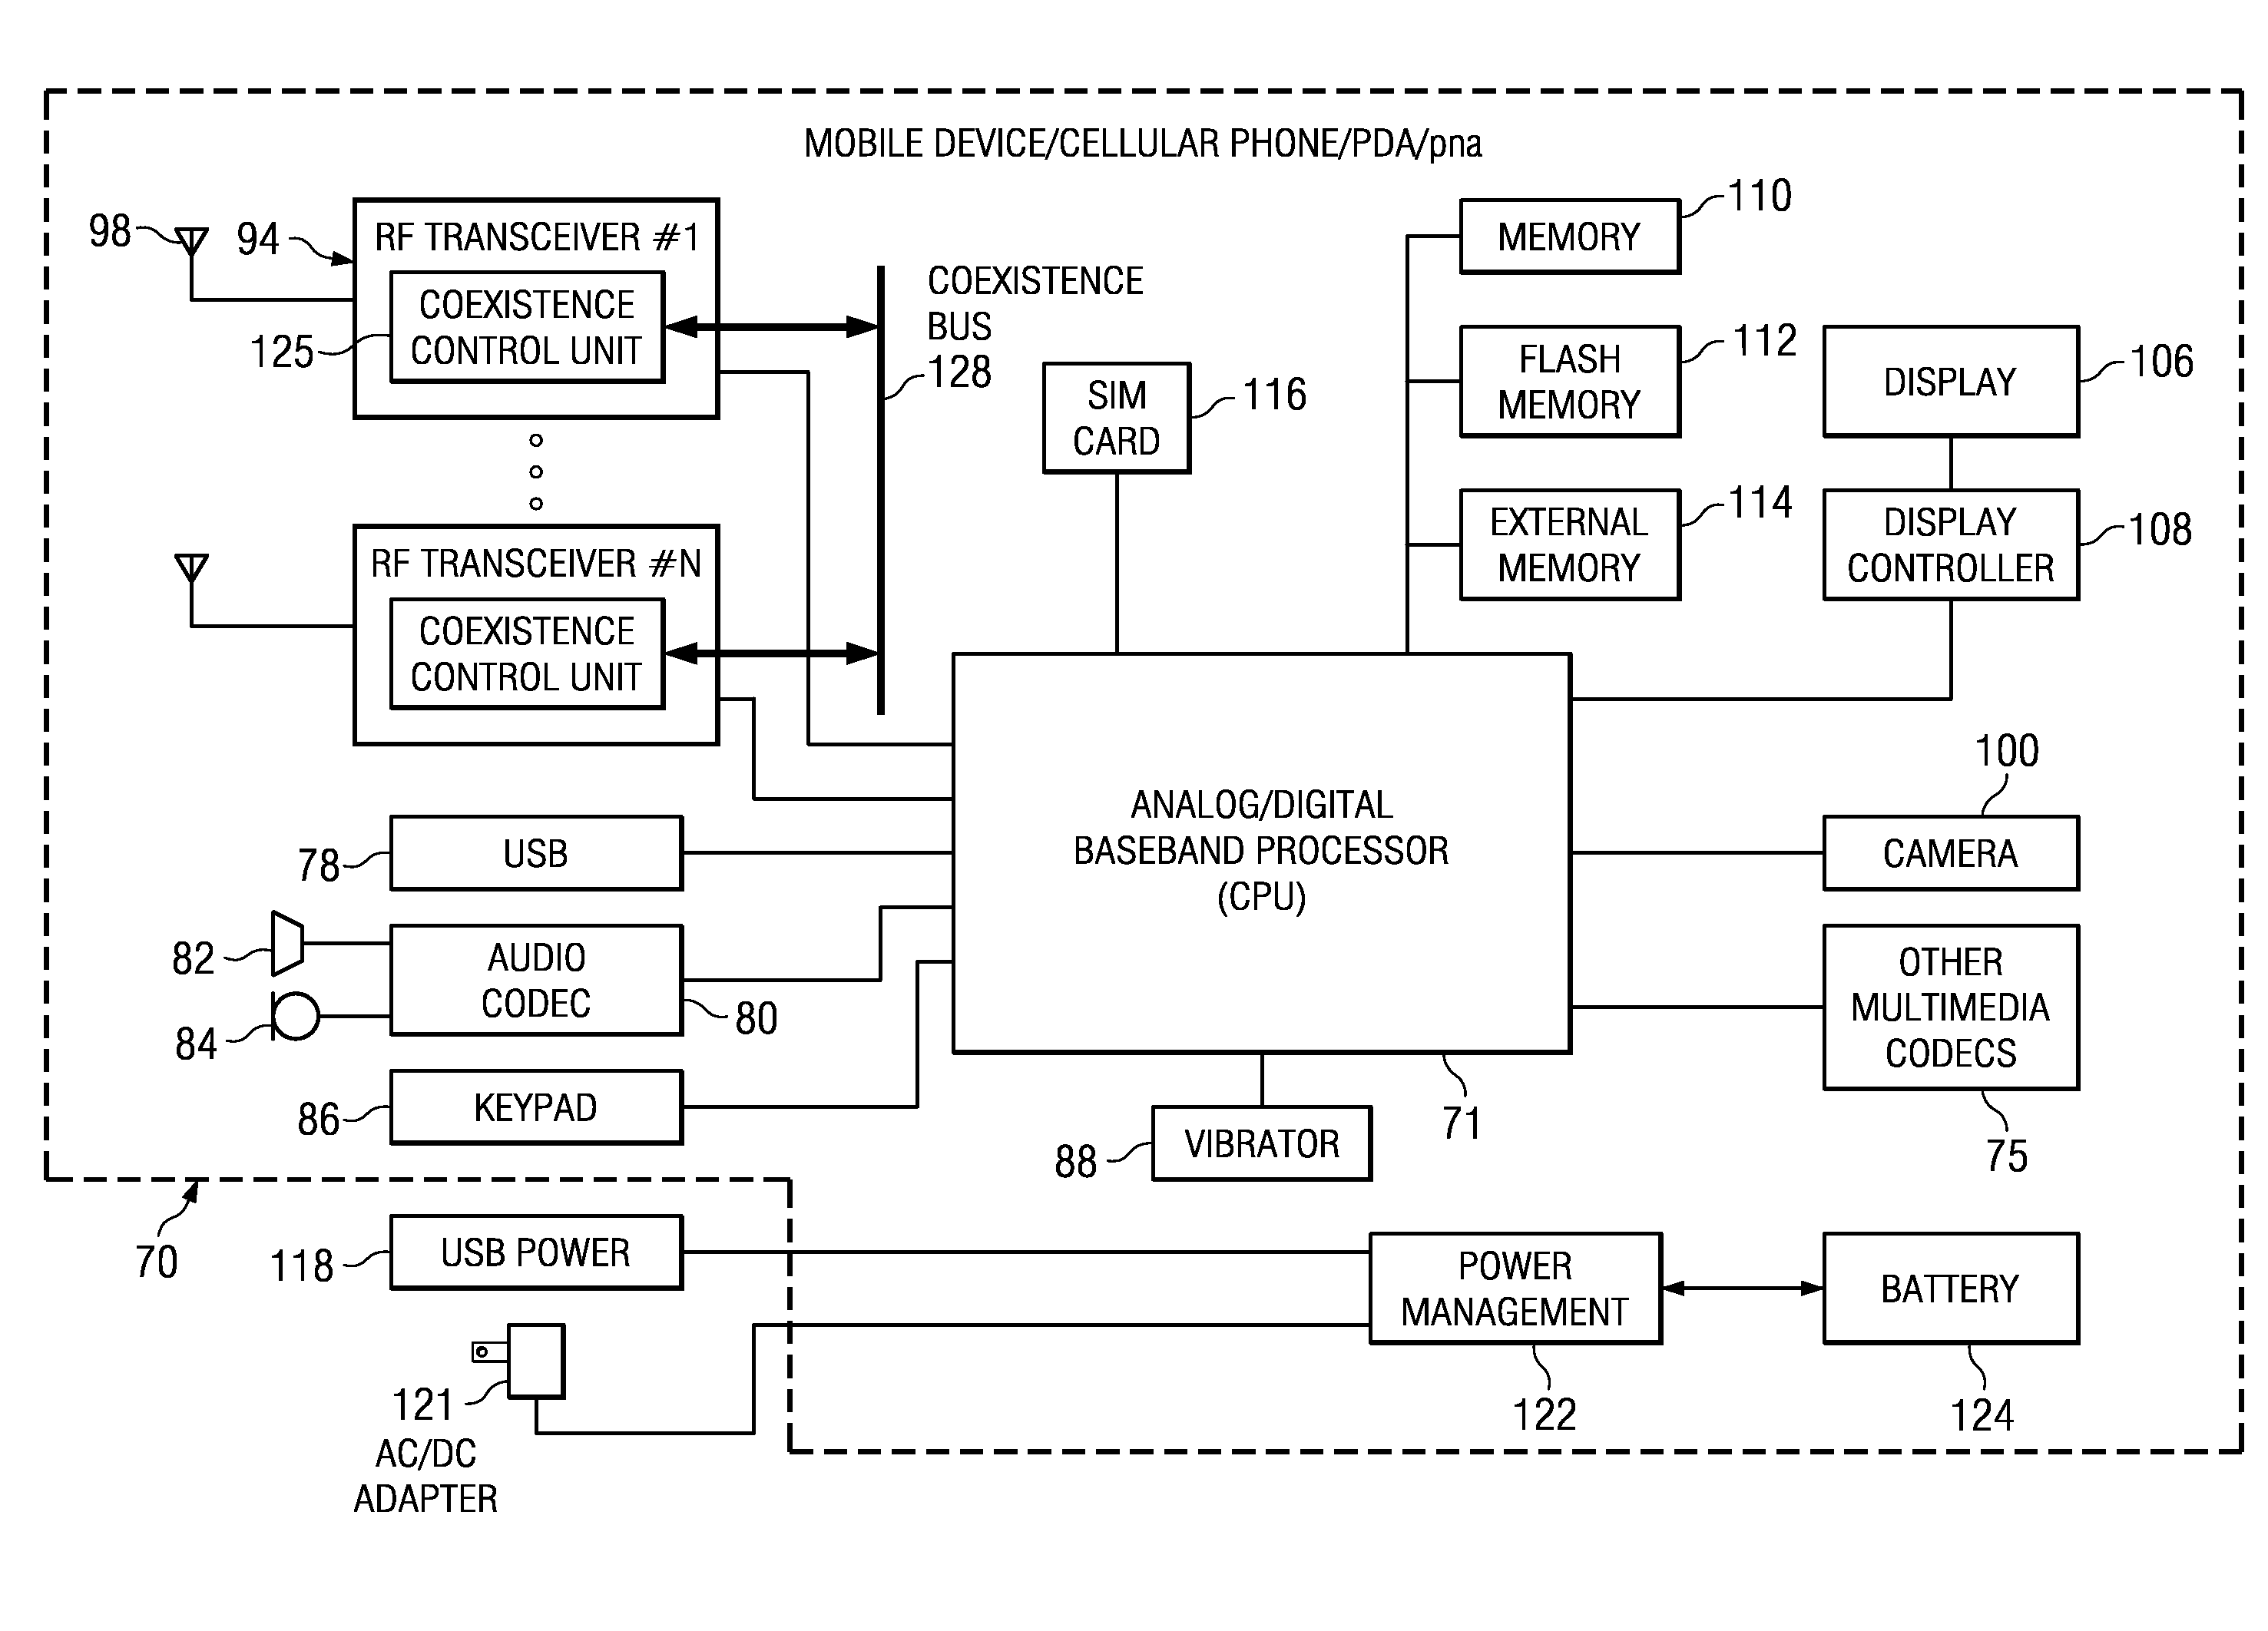 Distributed coexistence system for interference mitigation in a single chip radio or multi-radio communication device